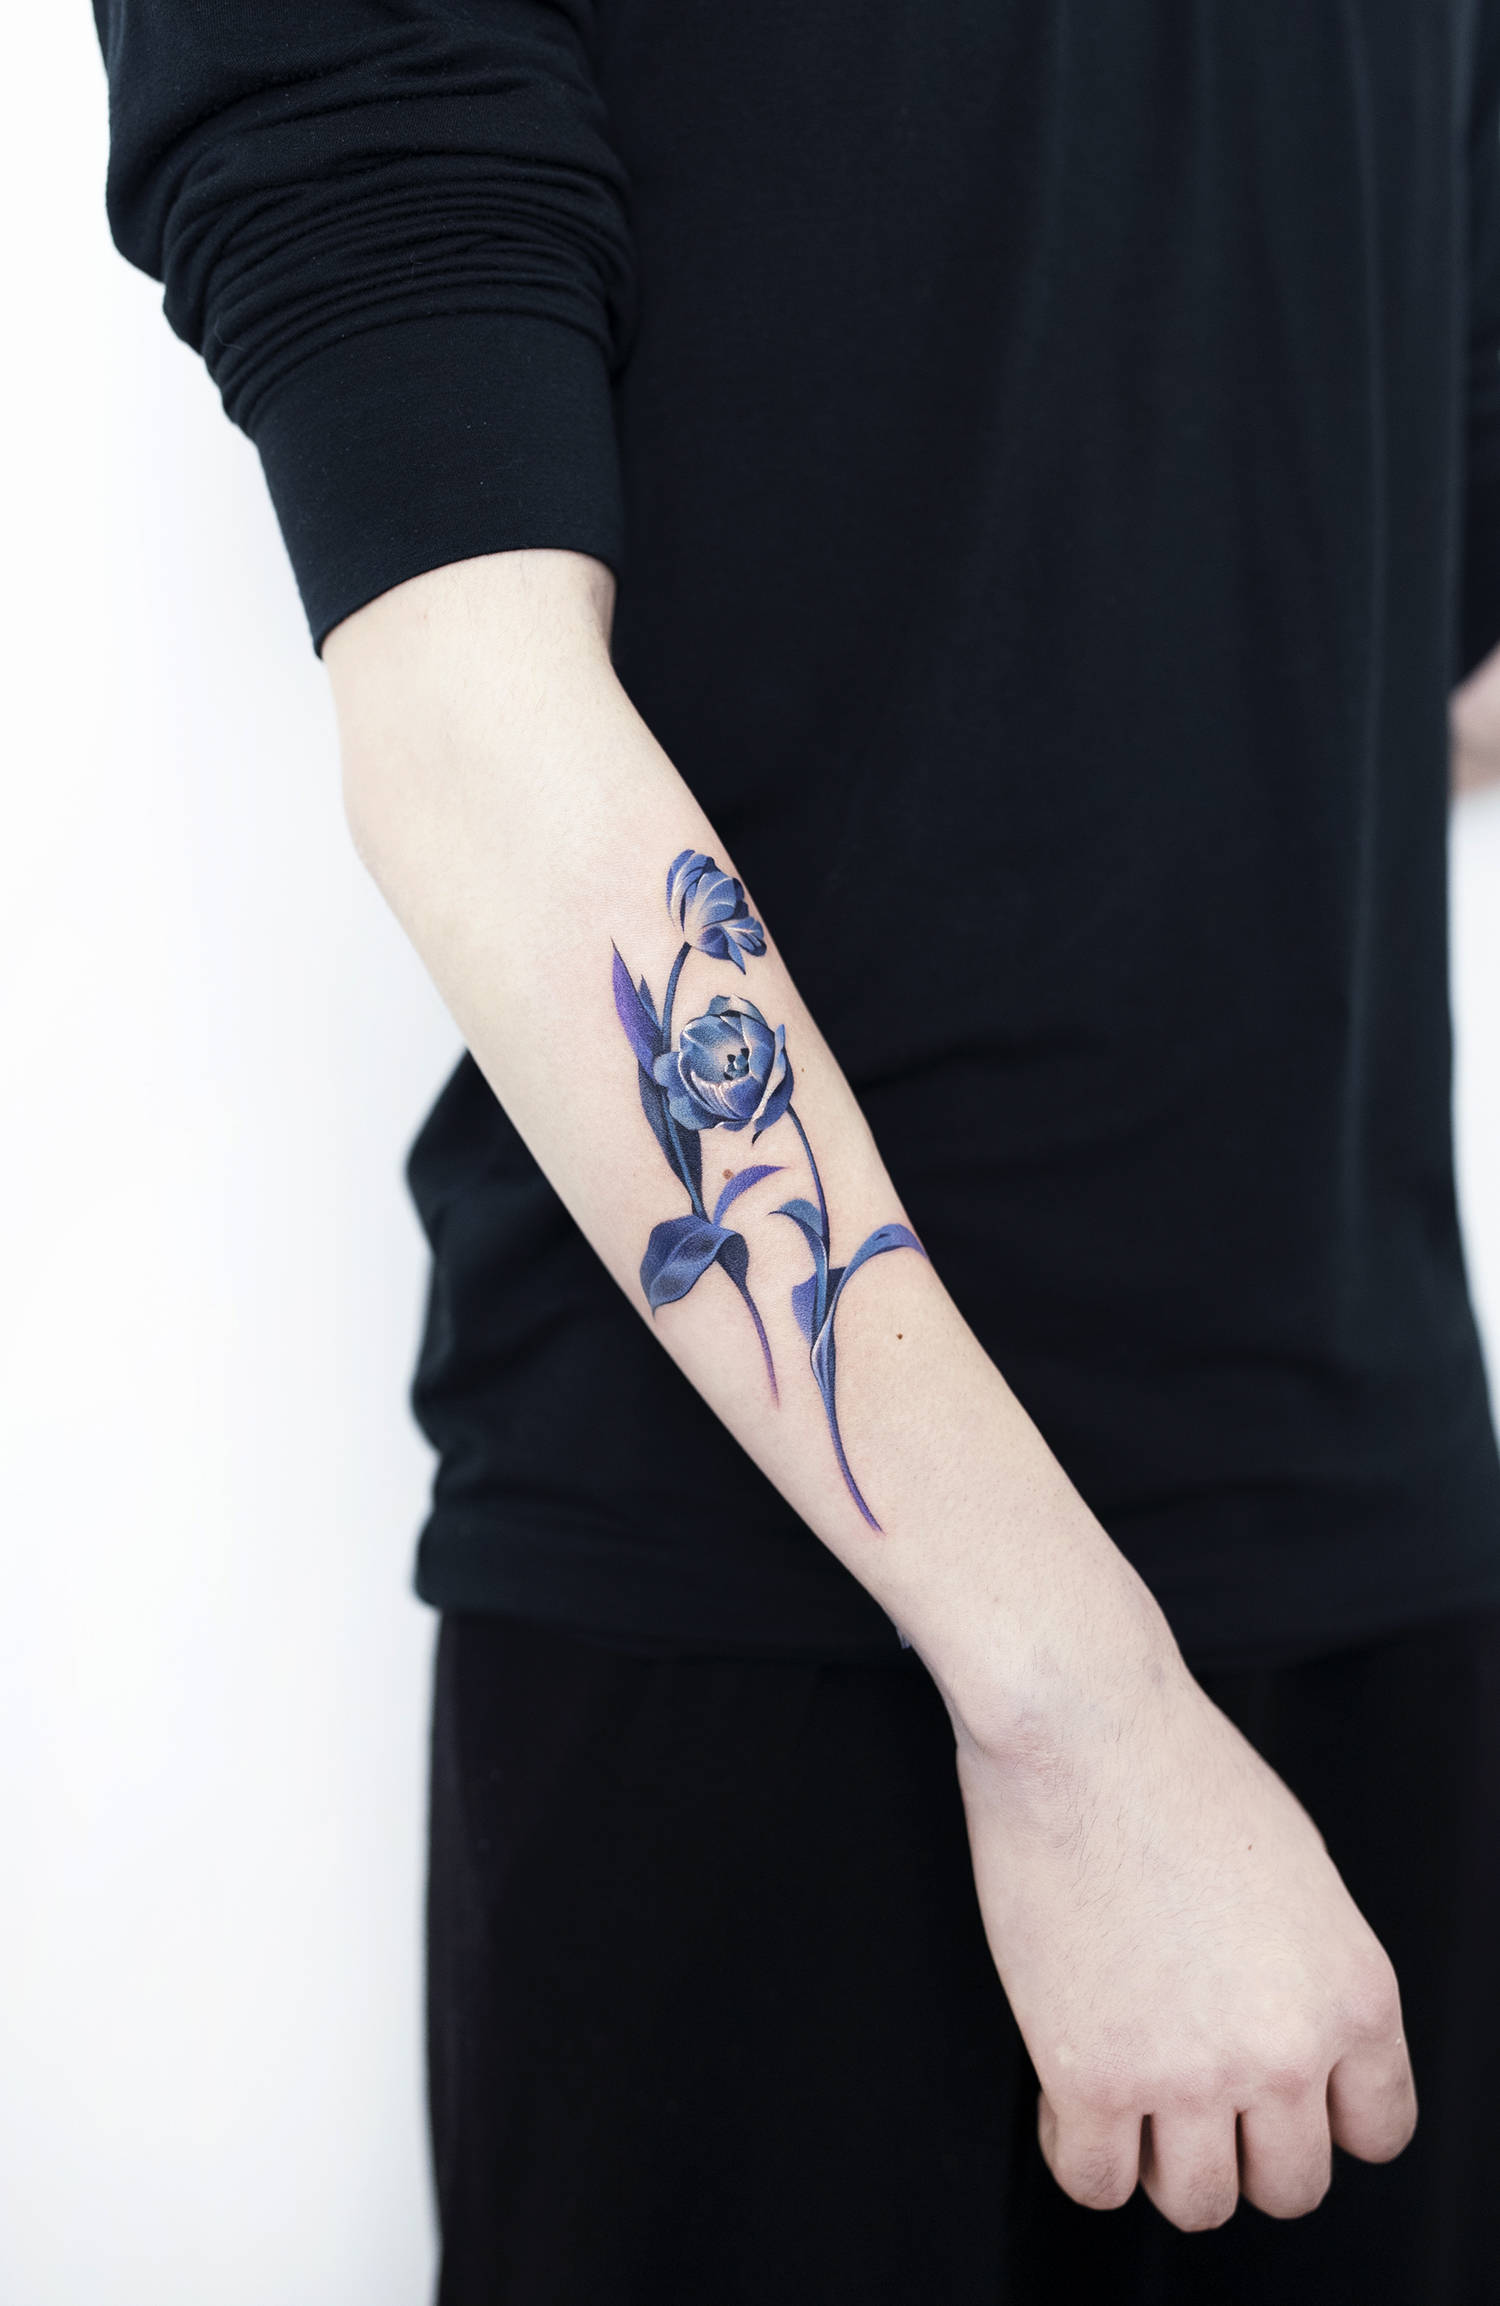 blue flower tattoo on arm, with white highlights
